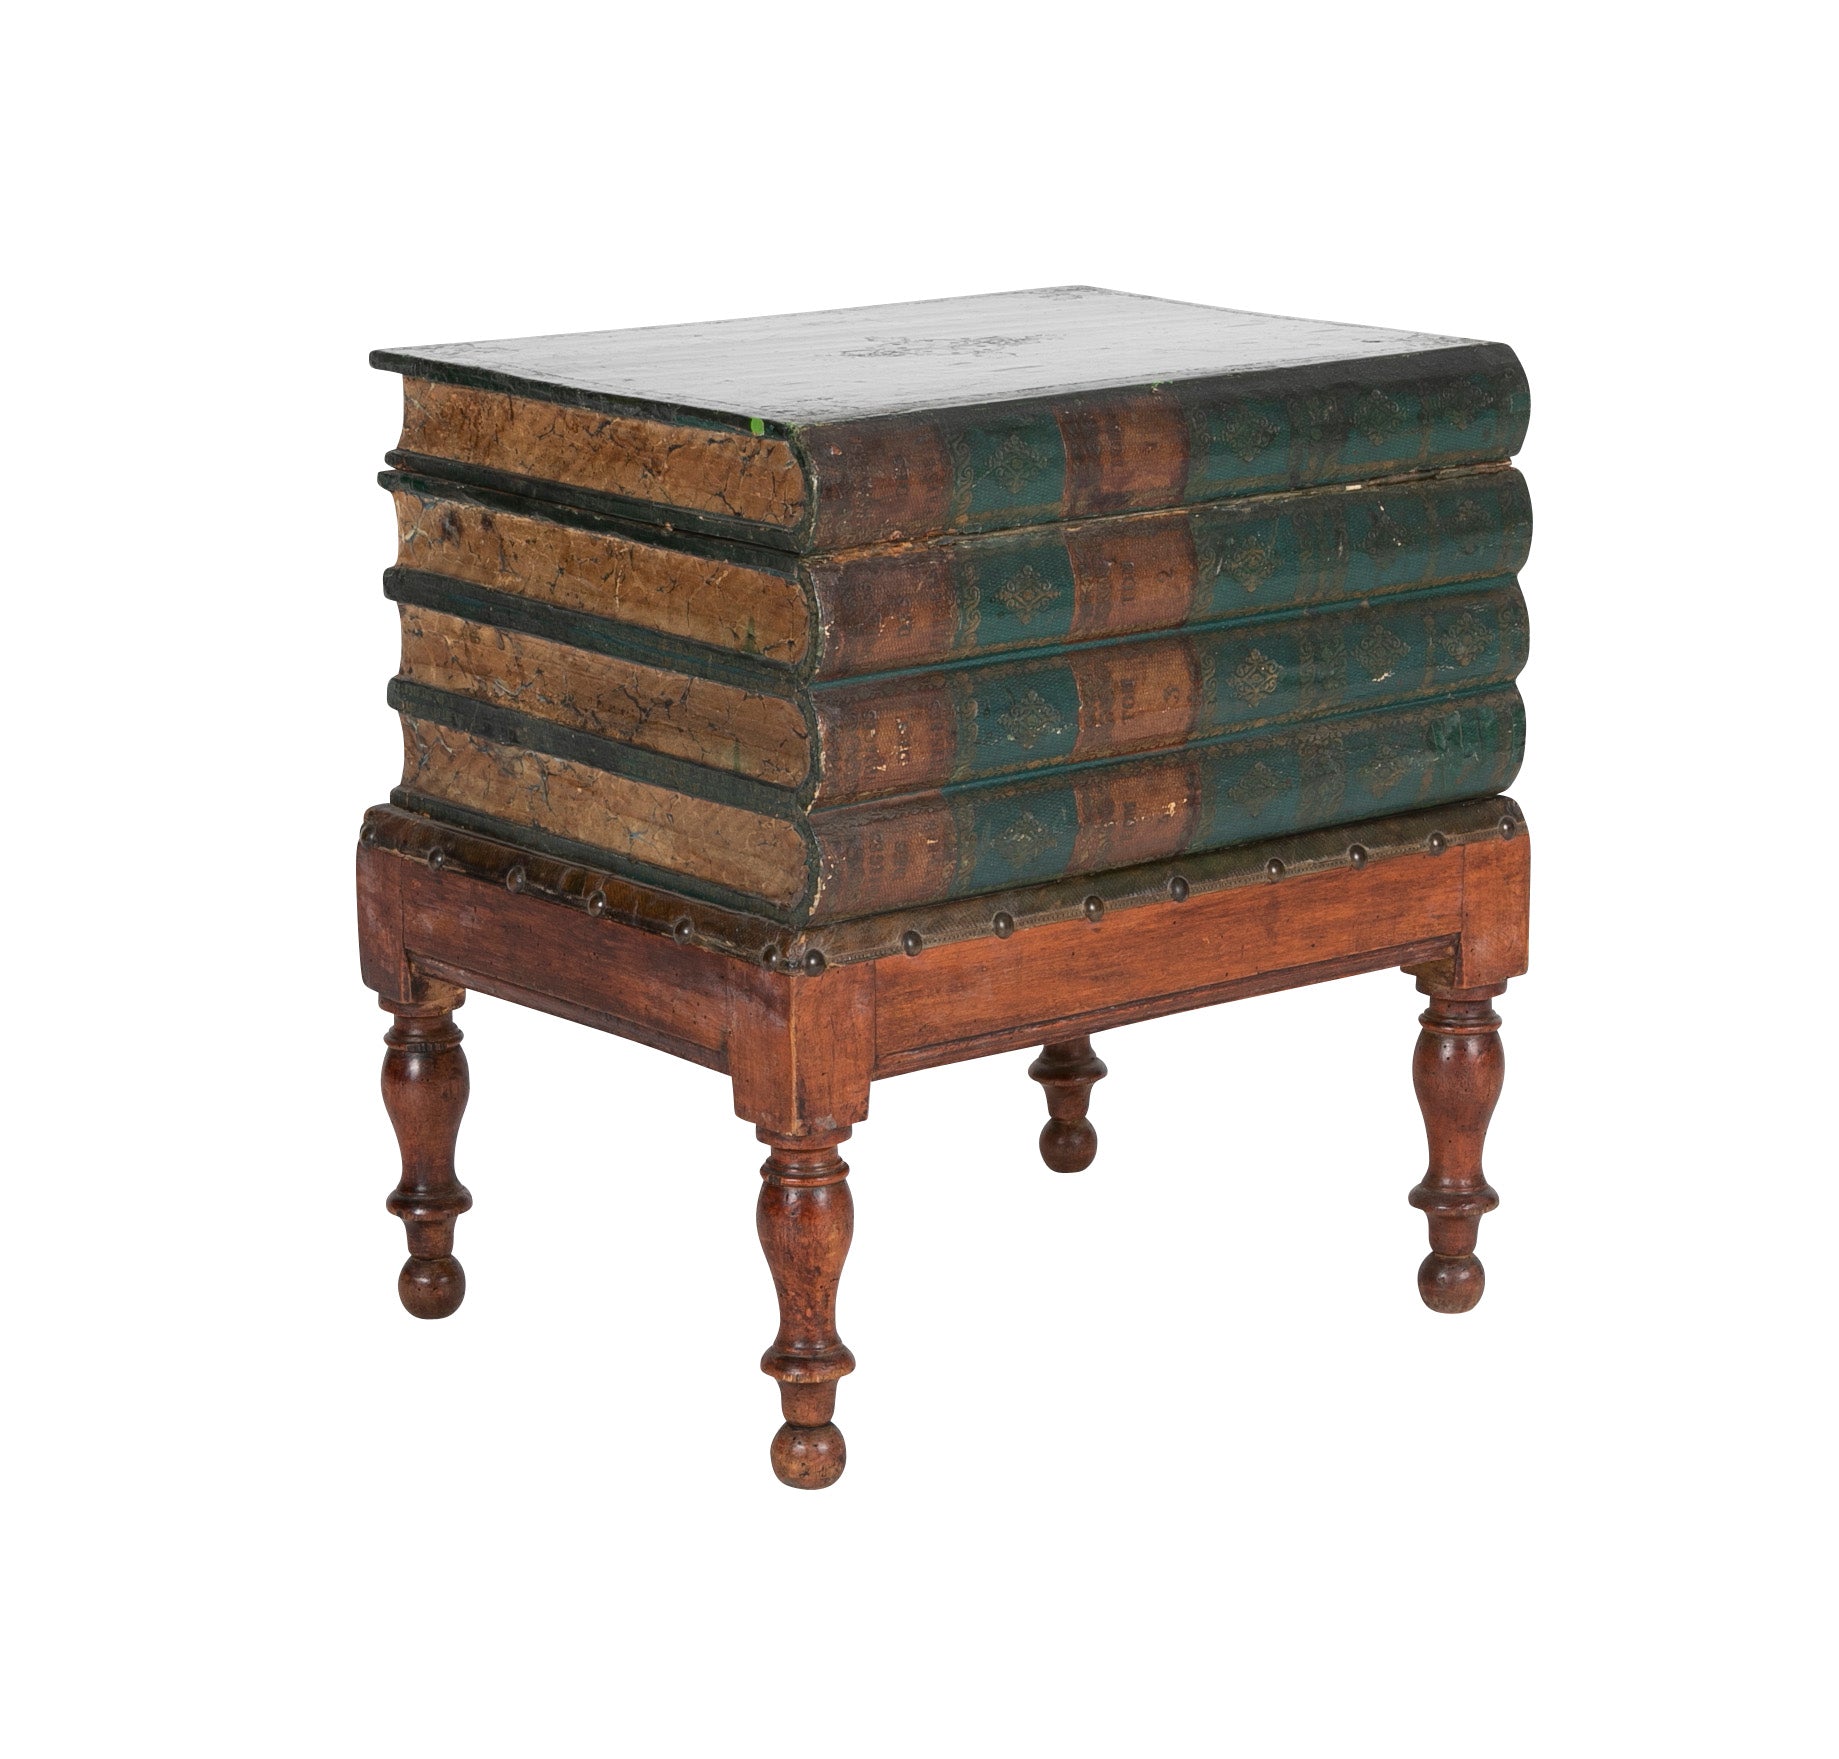 Stacked Book Form English Low Table